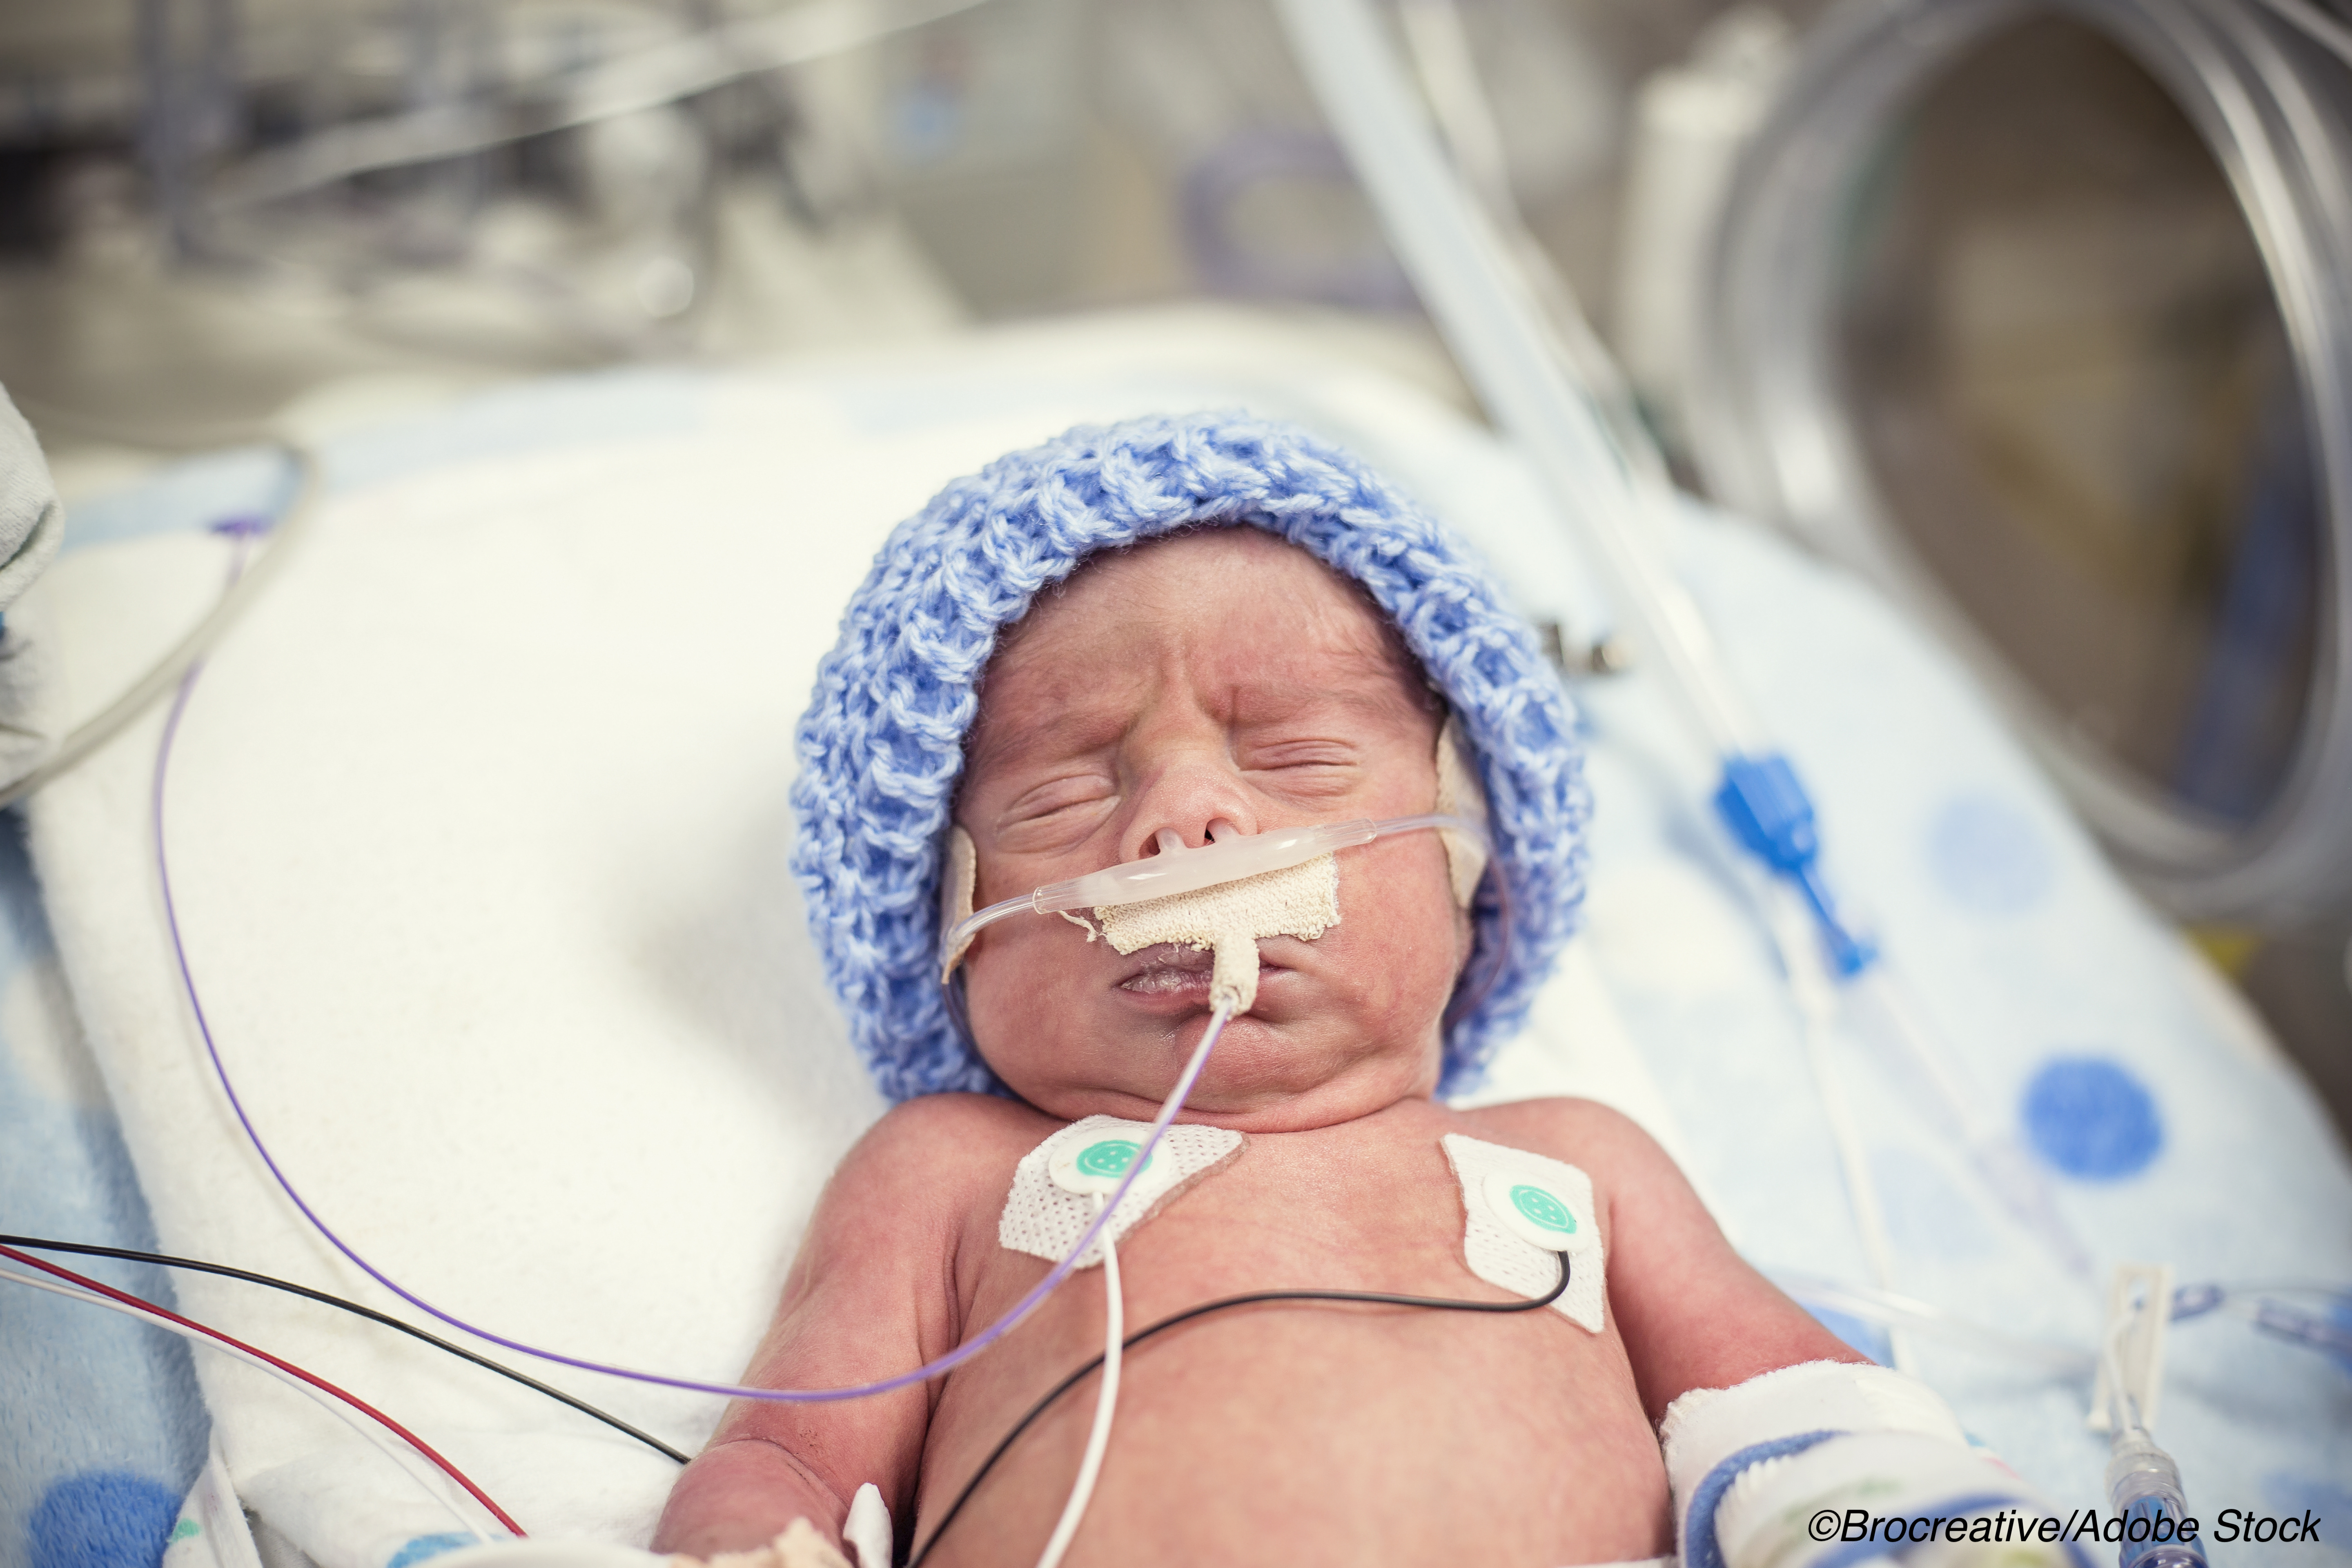 Notable Drop in Use, Duration of Mechanical Ventilation in Preemies
